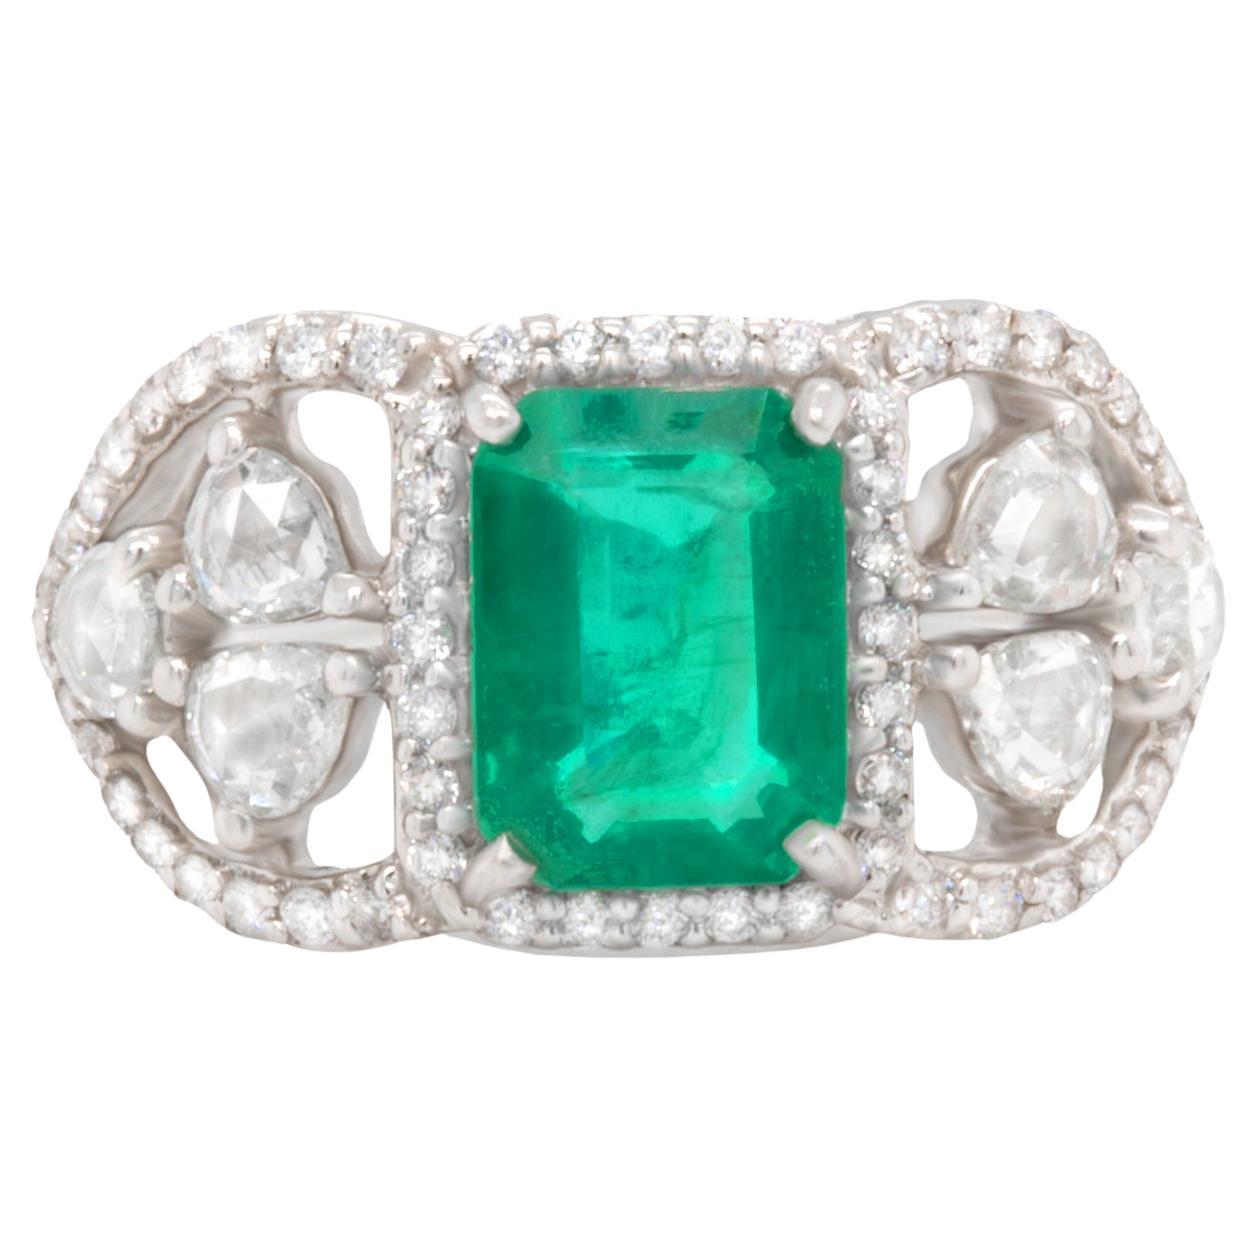 Emerald Ring With Diamonds 2.82 Carats 18K White Gold For Sale